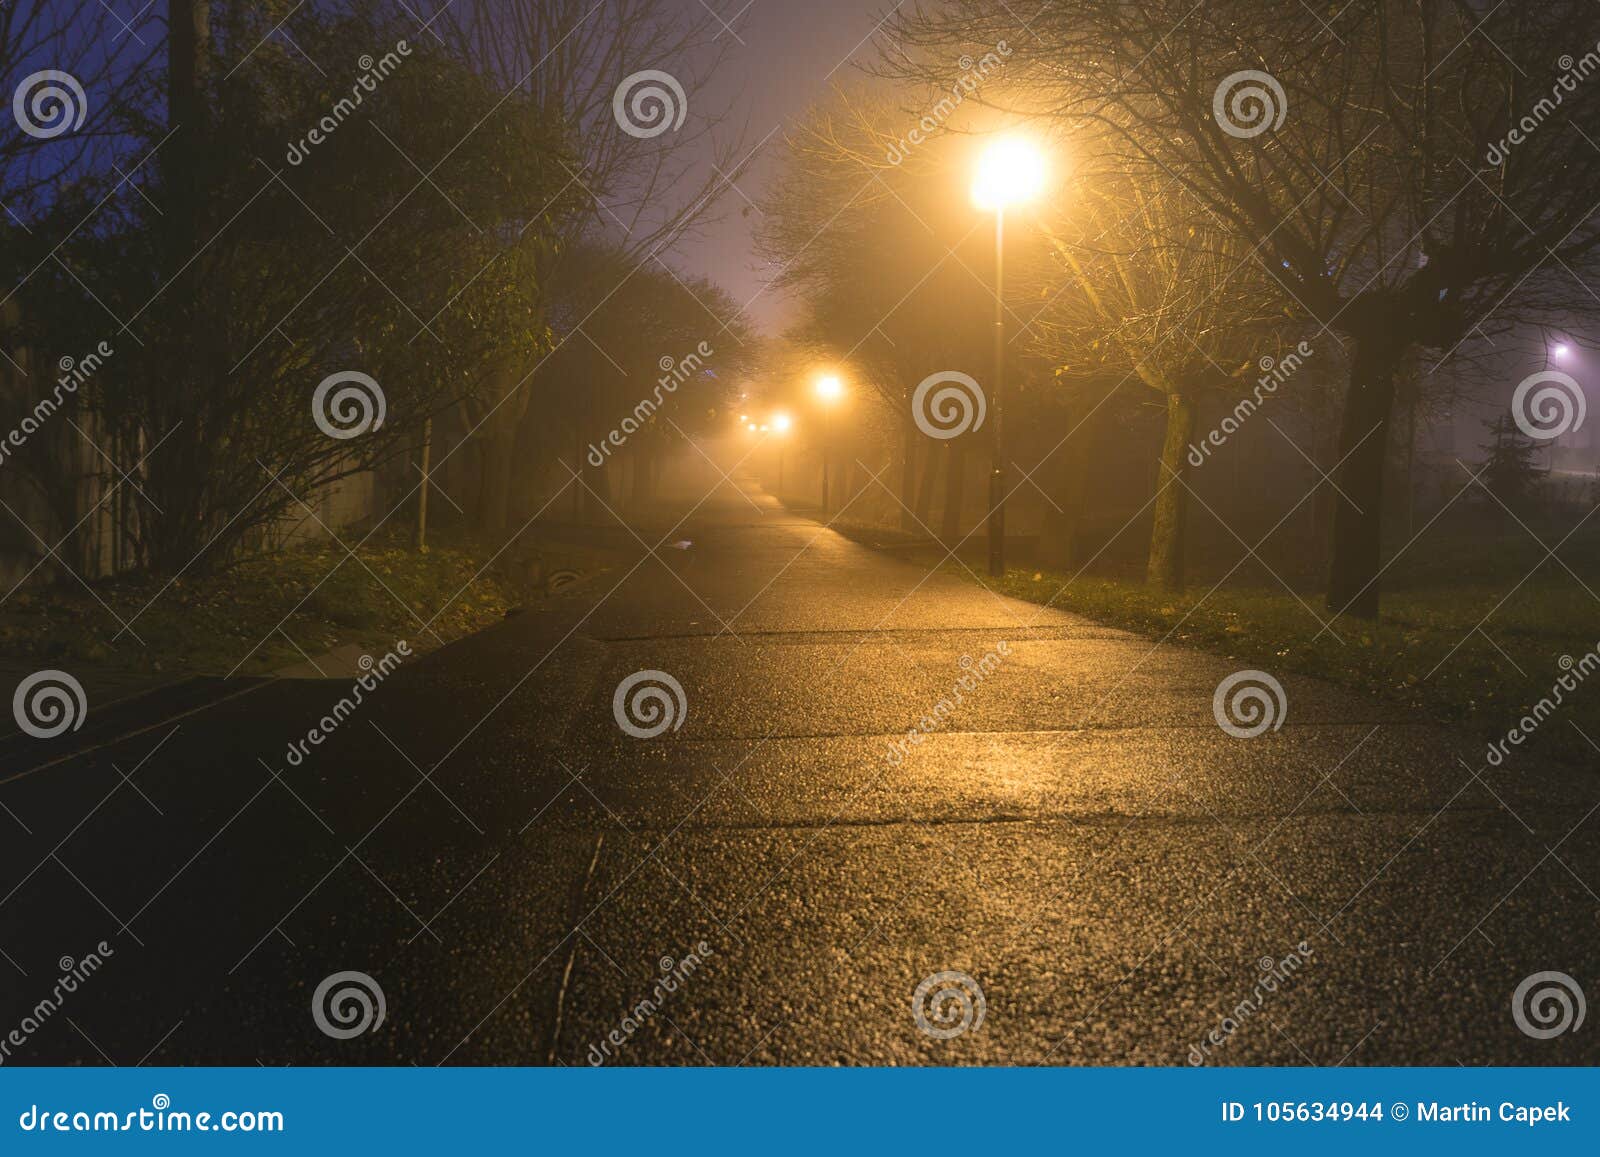 dark alley iluminated by street lamps